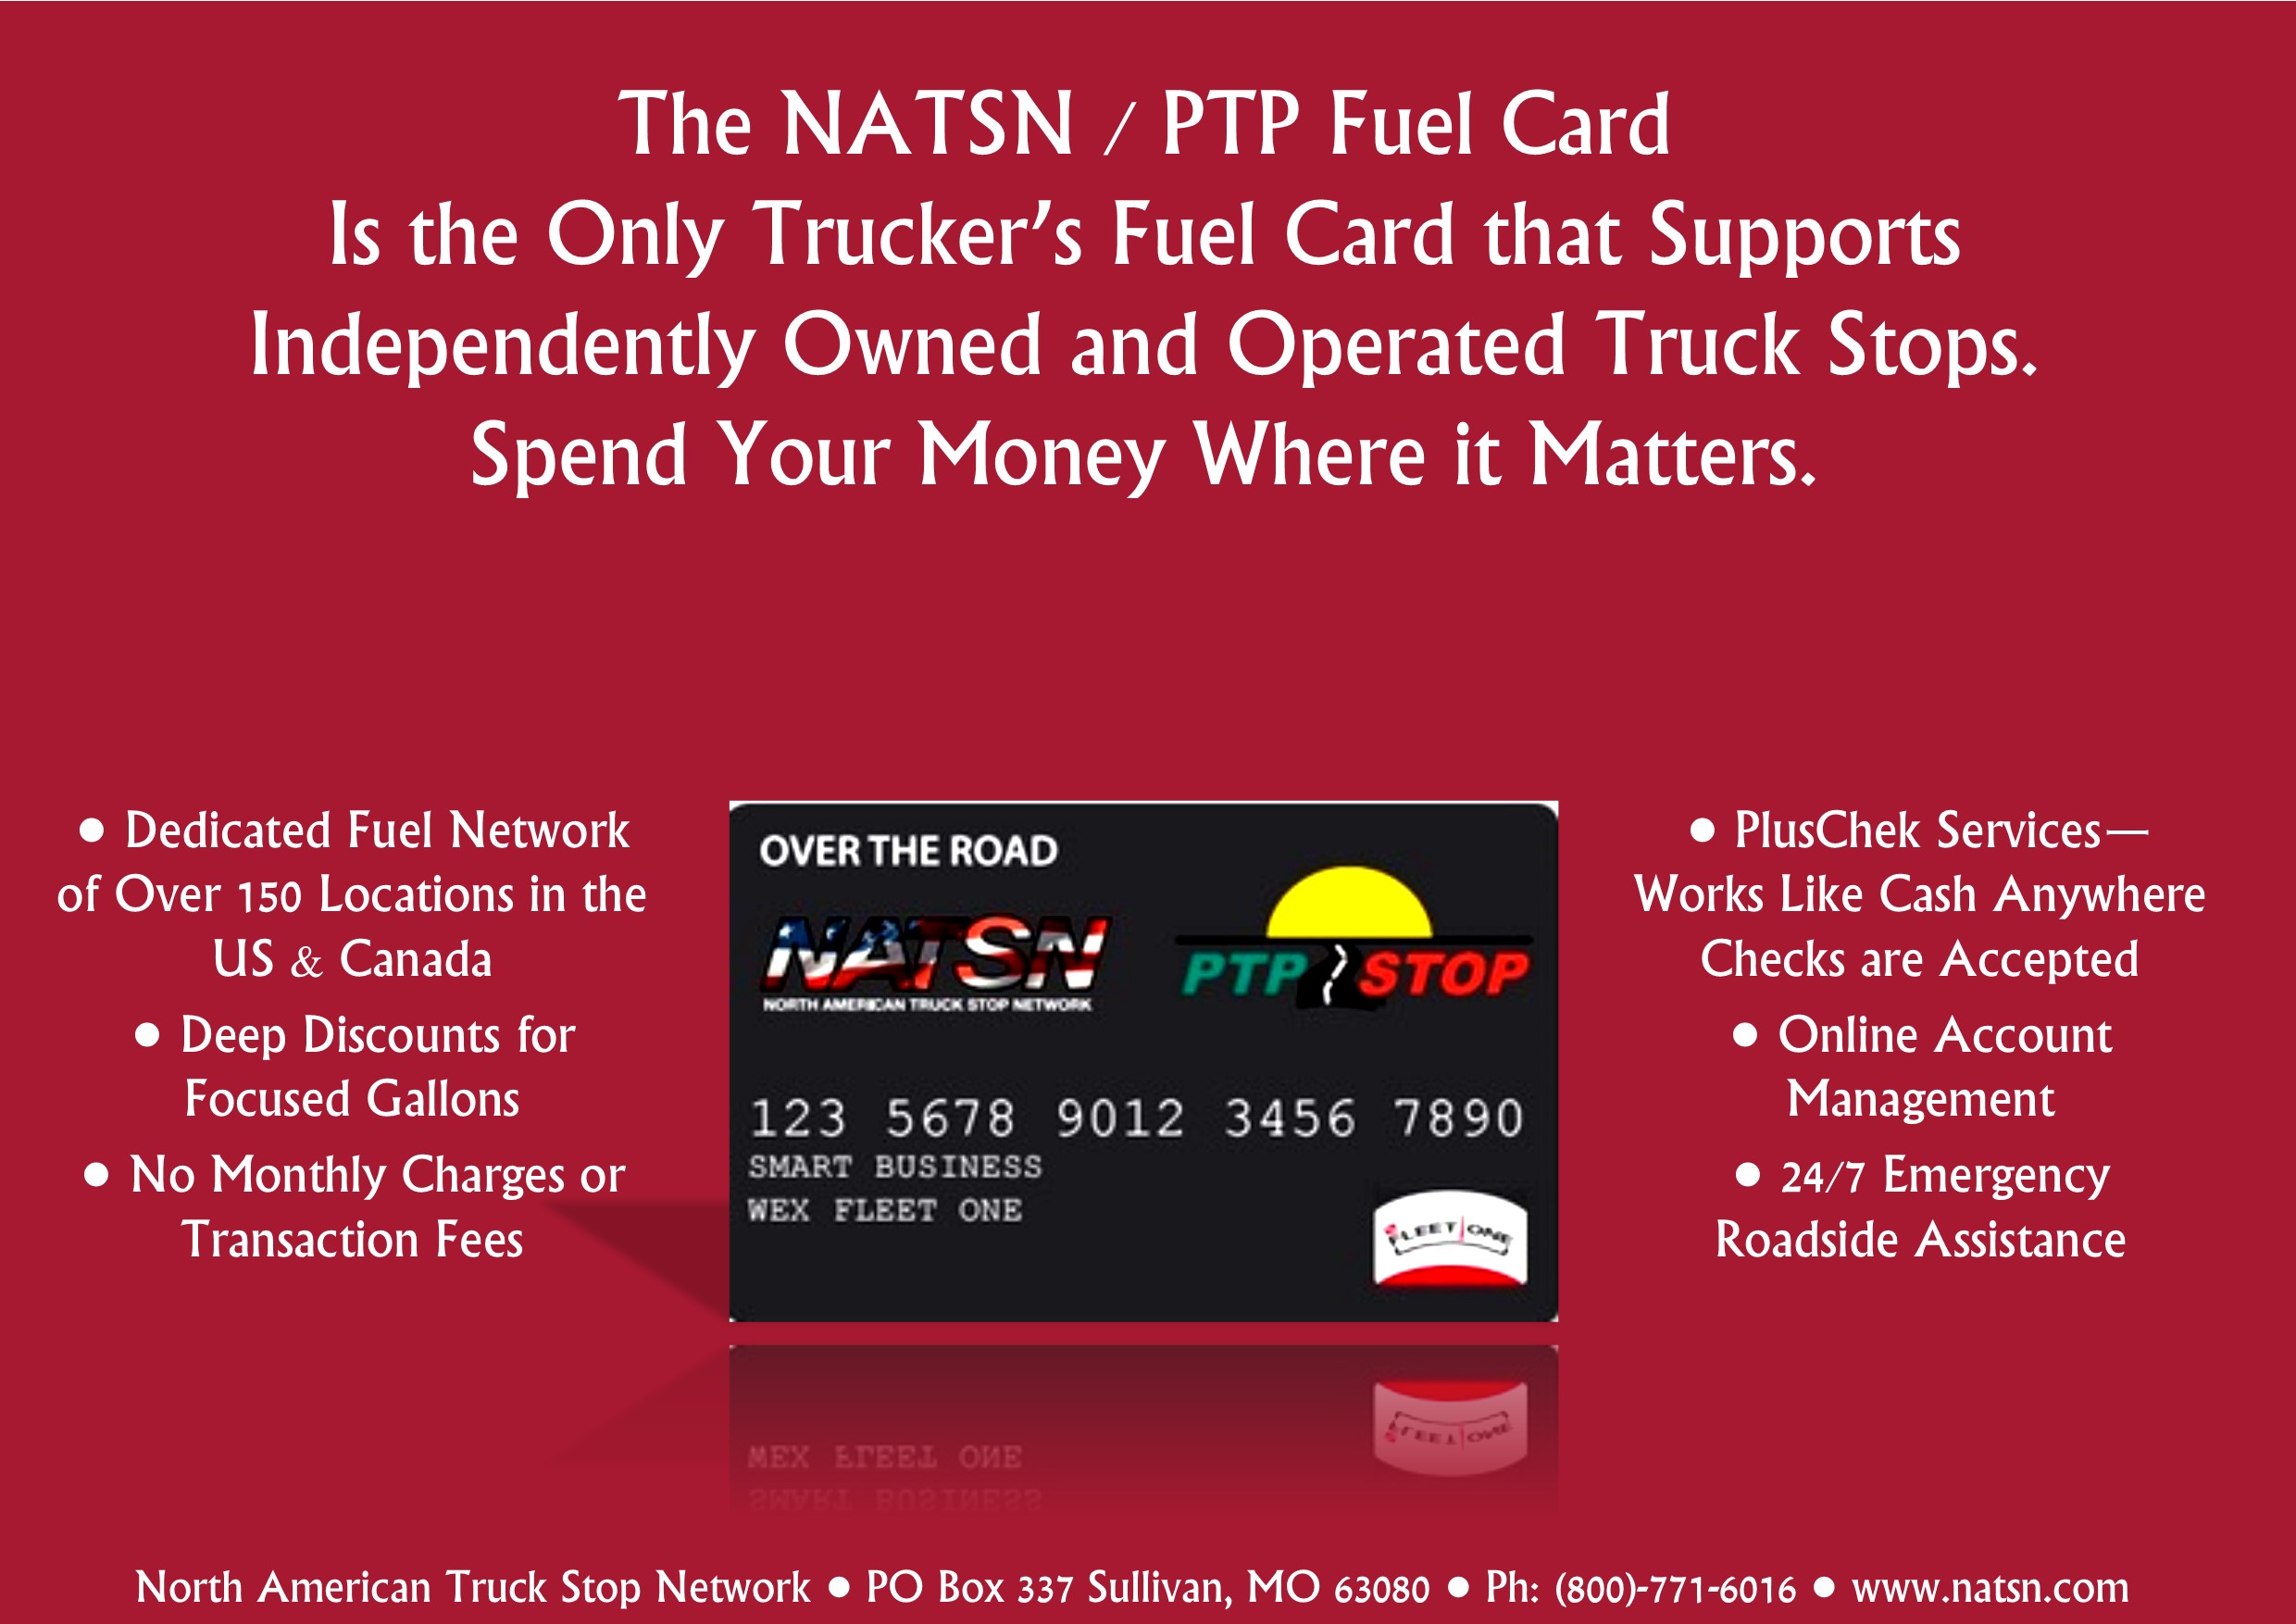 Trucker's Fuel Card, Truck Driver, Fuel Card, NATSN, AmBest, Roady's, Pilot, Flying J, Best Truck Stop, Best Fuel Card, Independent, Mom and Pop, Professional Driver, Fuel Card, trucker fuel card